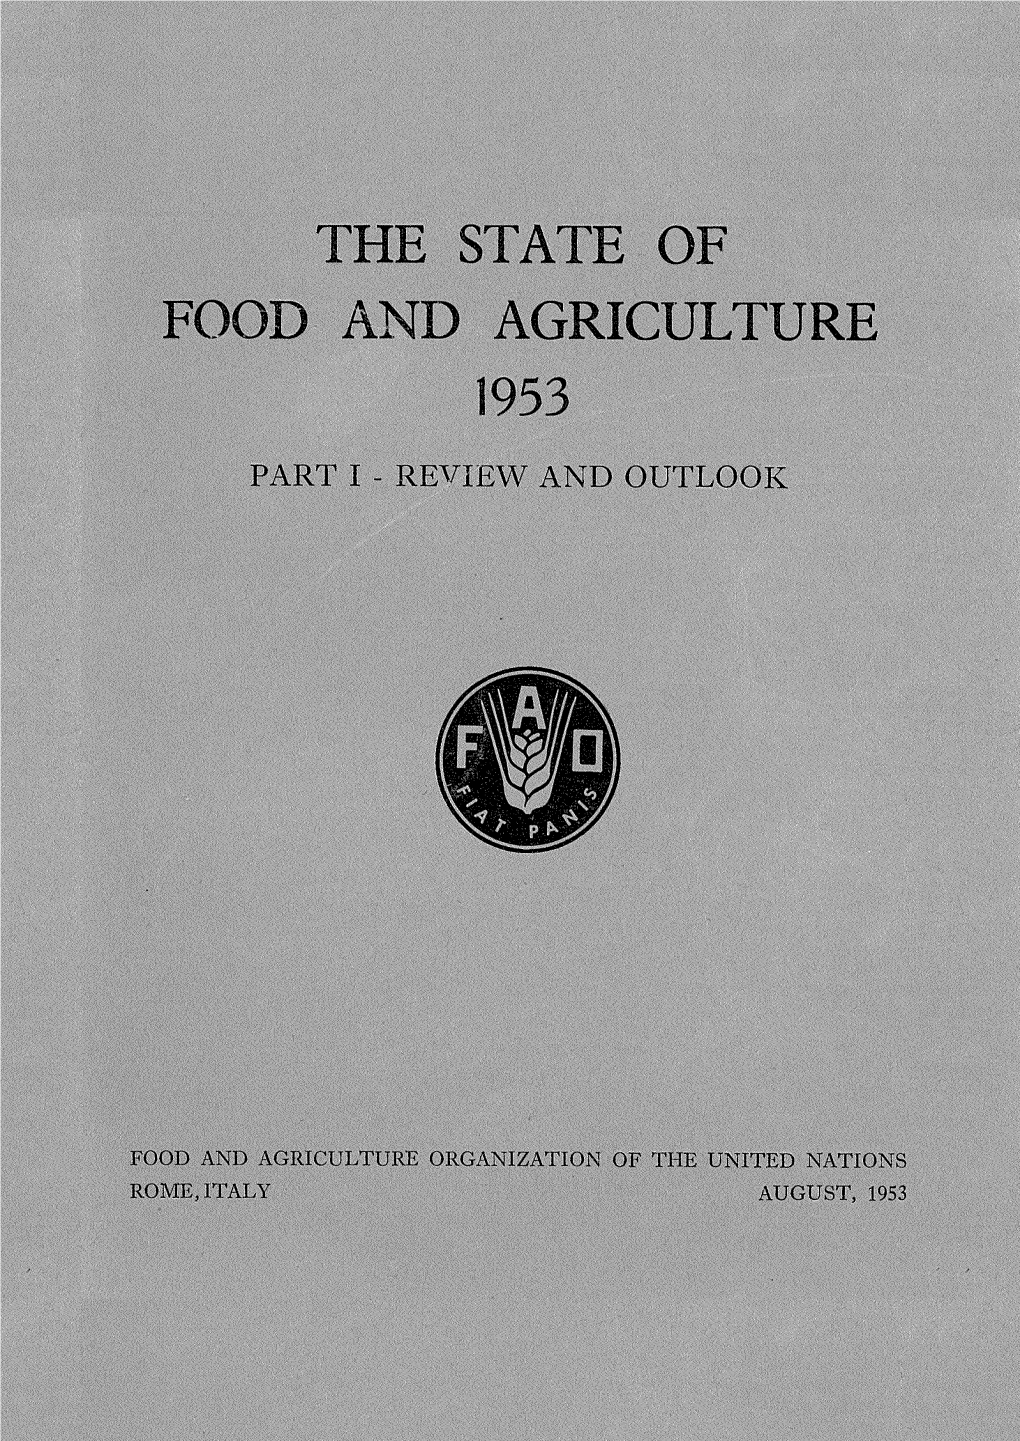 The State of Food and Agriculture, 1953